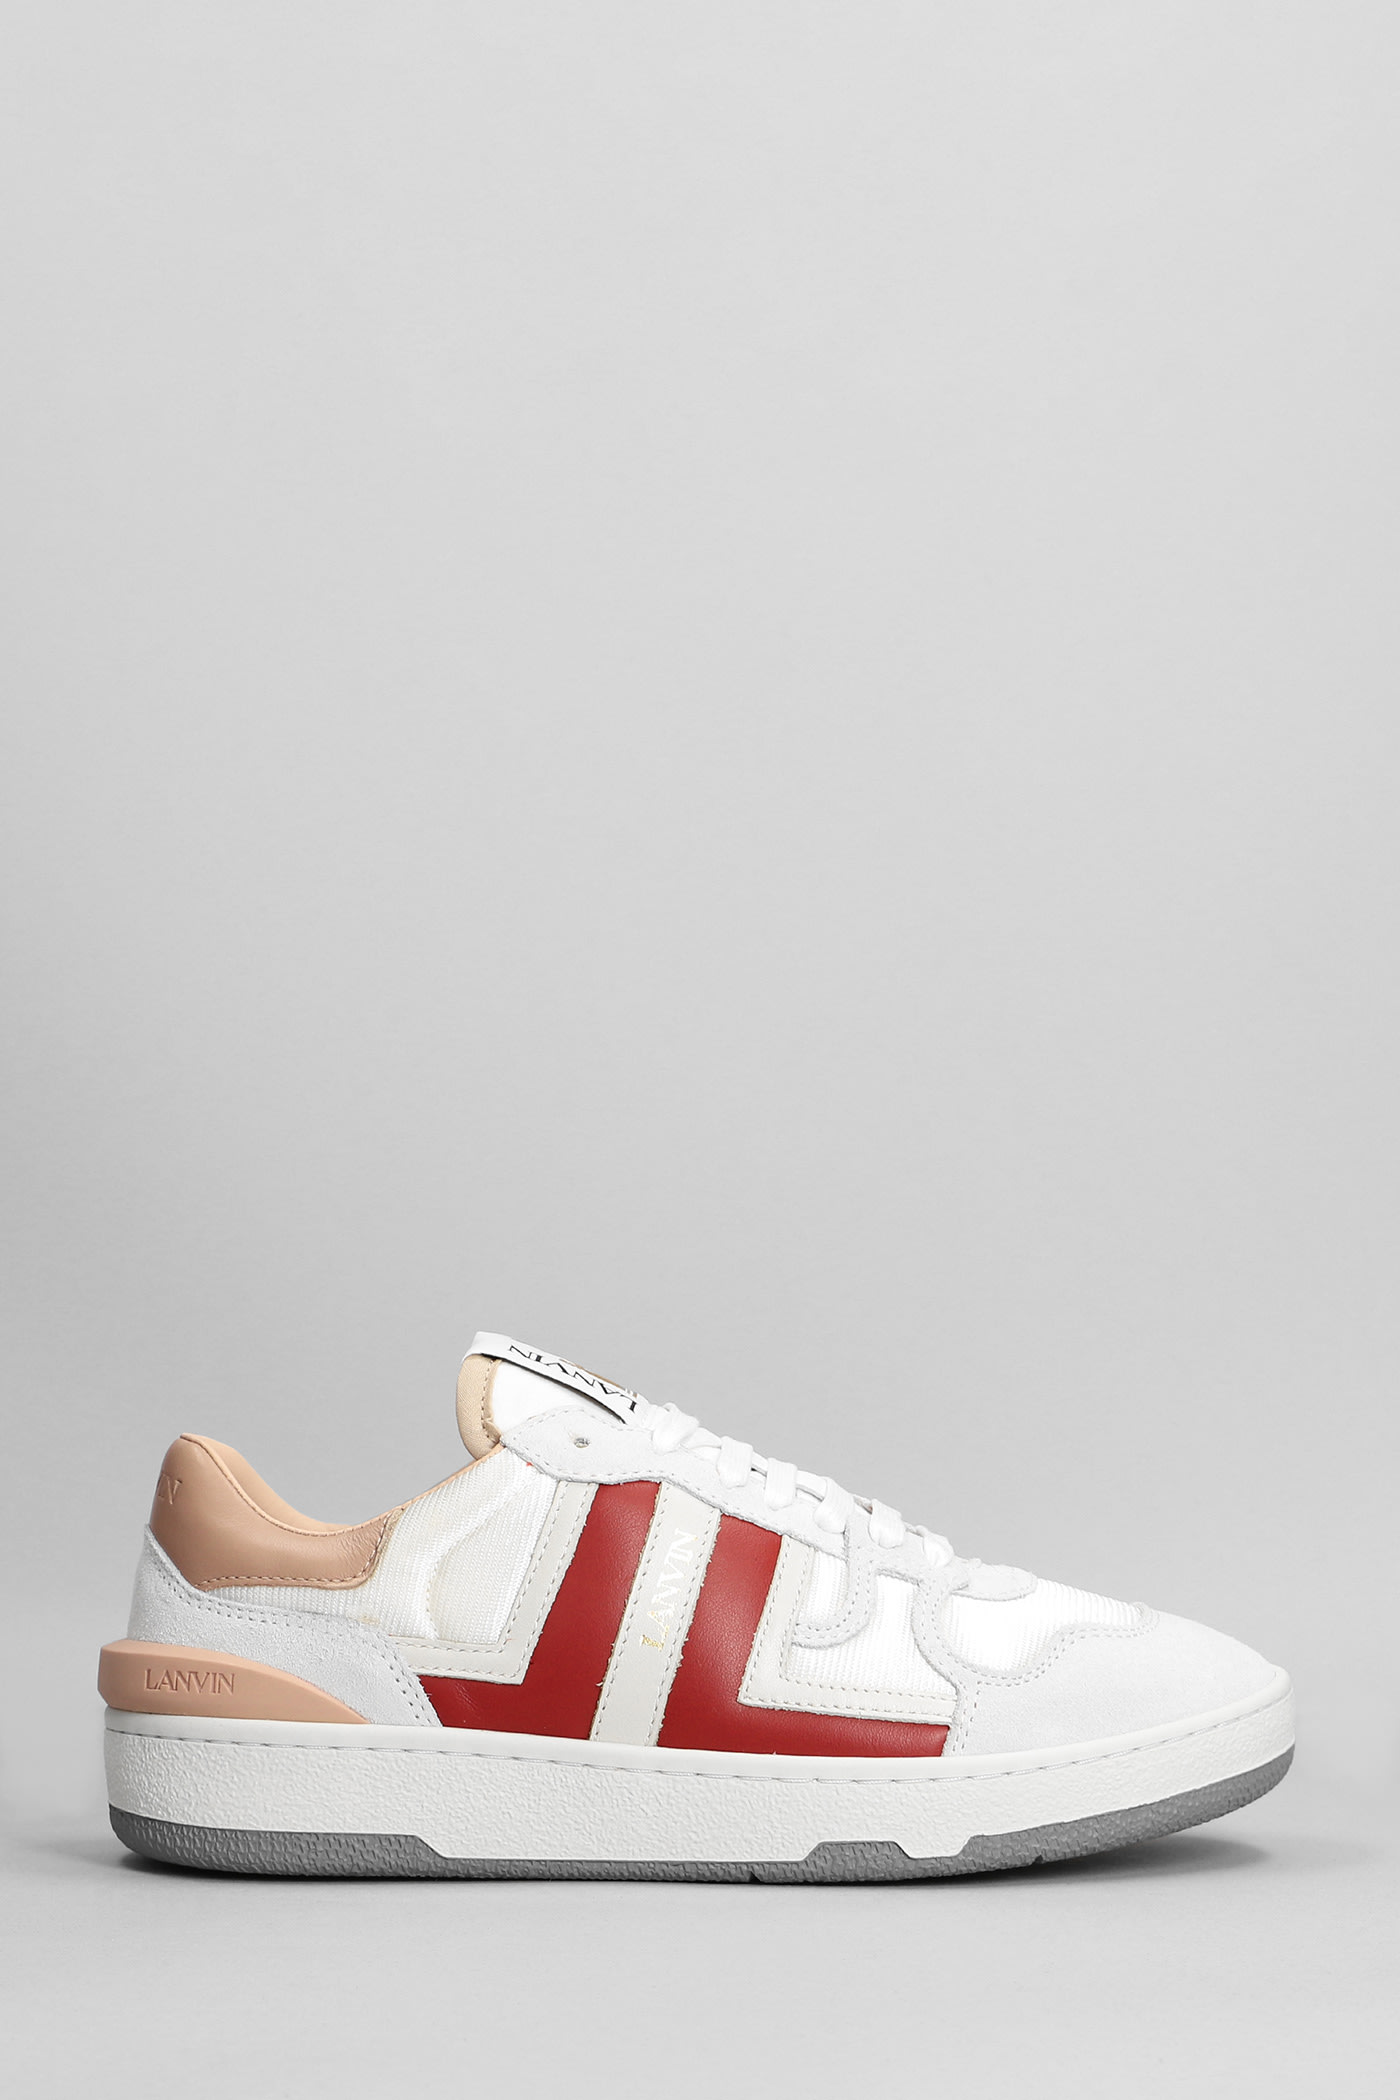 Lanvin Sneakers In Rose-pink Suede And Leather